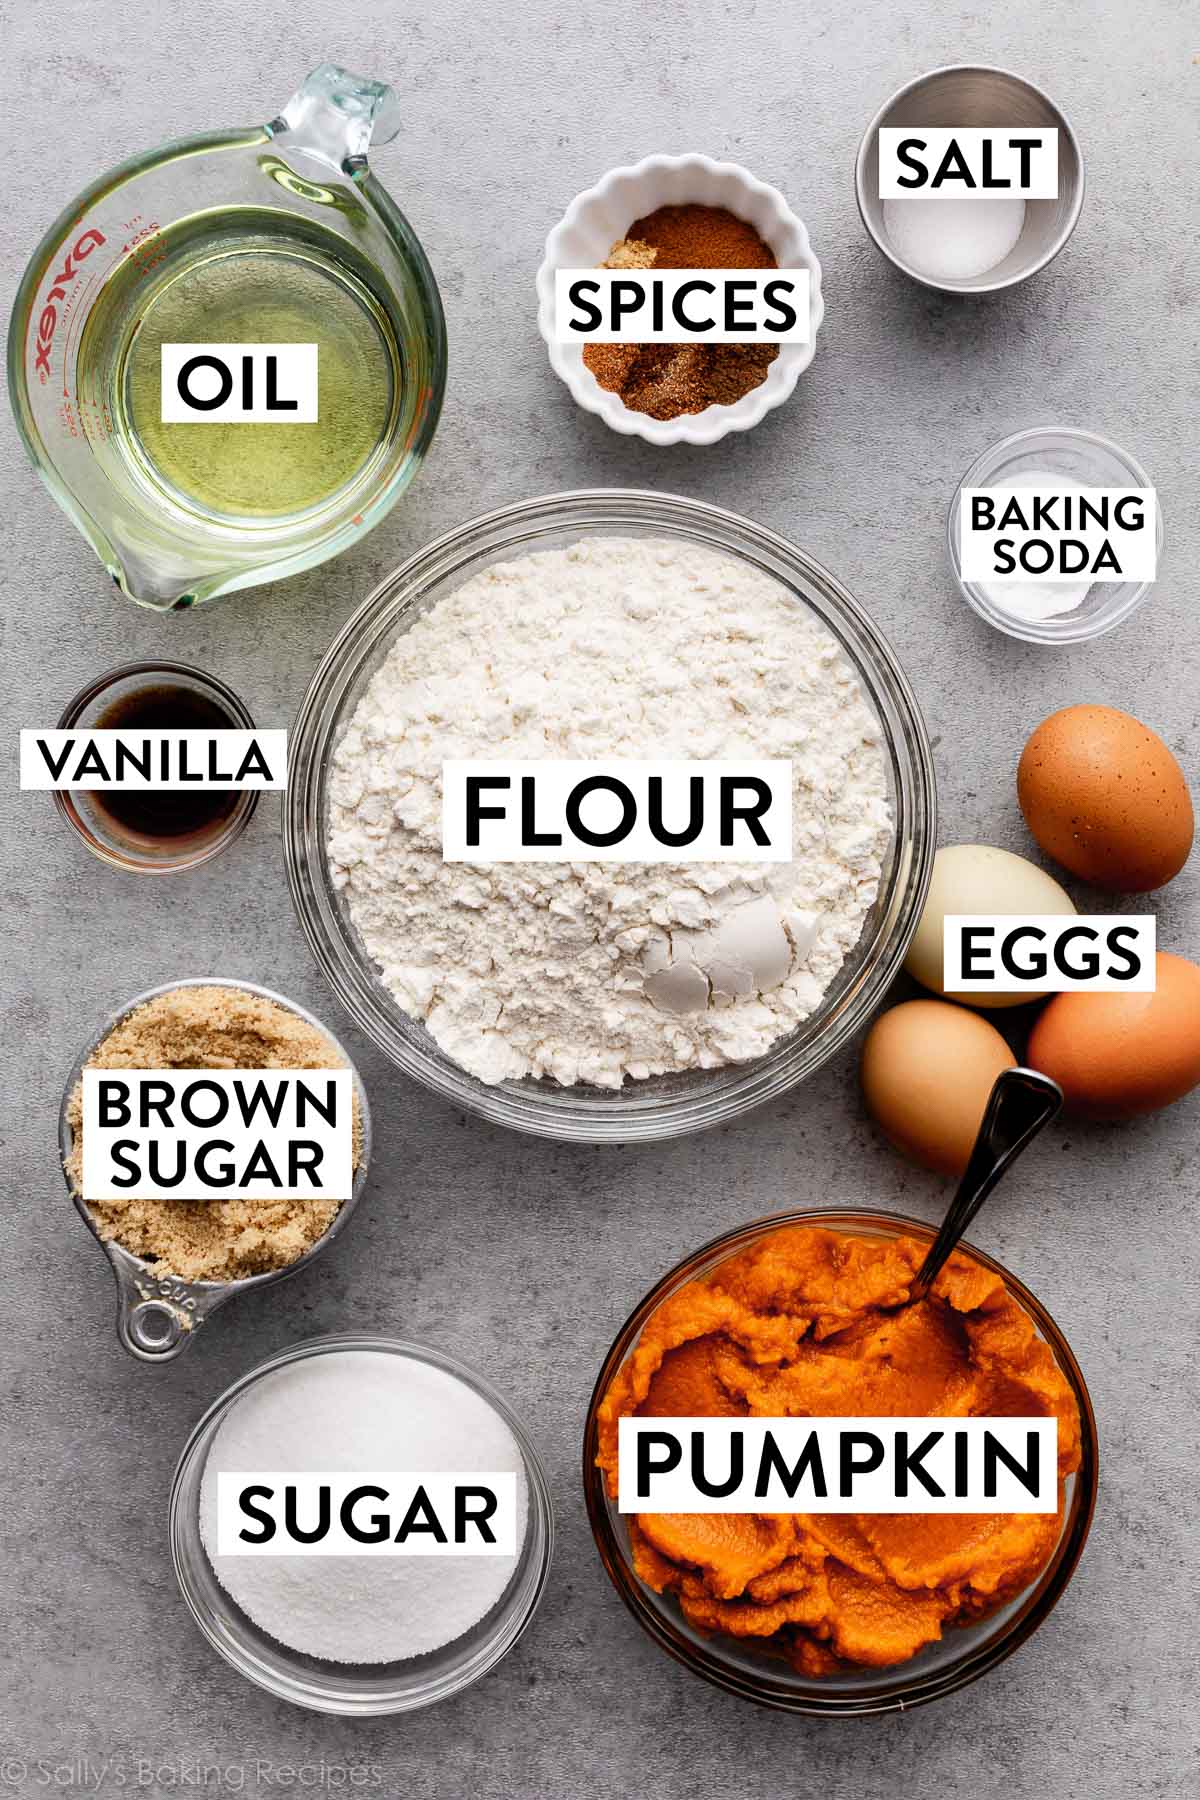 ingredients in bowls on gray backdrop including oil, spices, flour, eggs, sugar, brown sugar, salt, and baking soda.